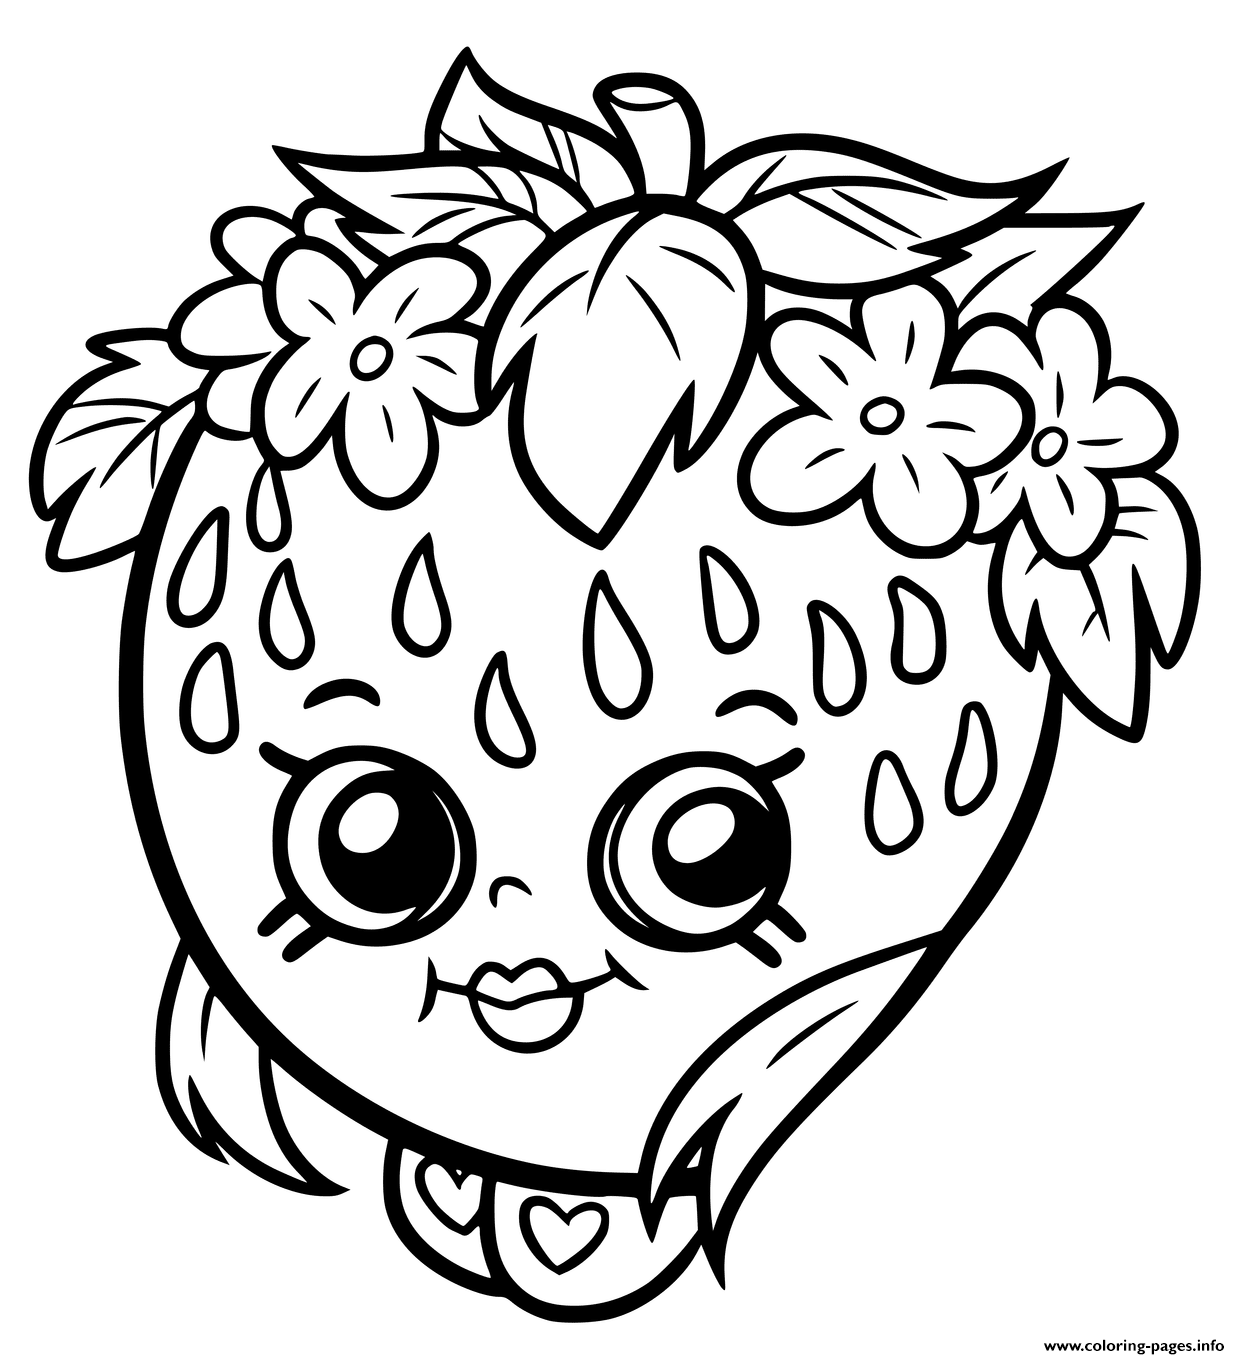 Shopkins Strawberry Smile Coloring Pages Printable Coloring Pages For Free